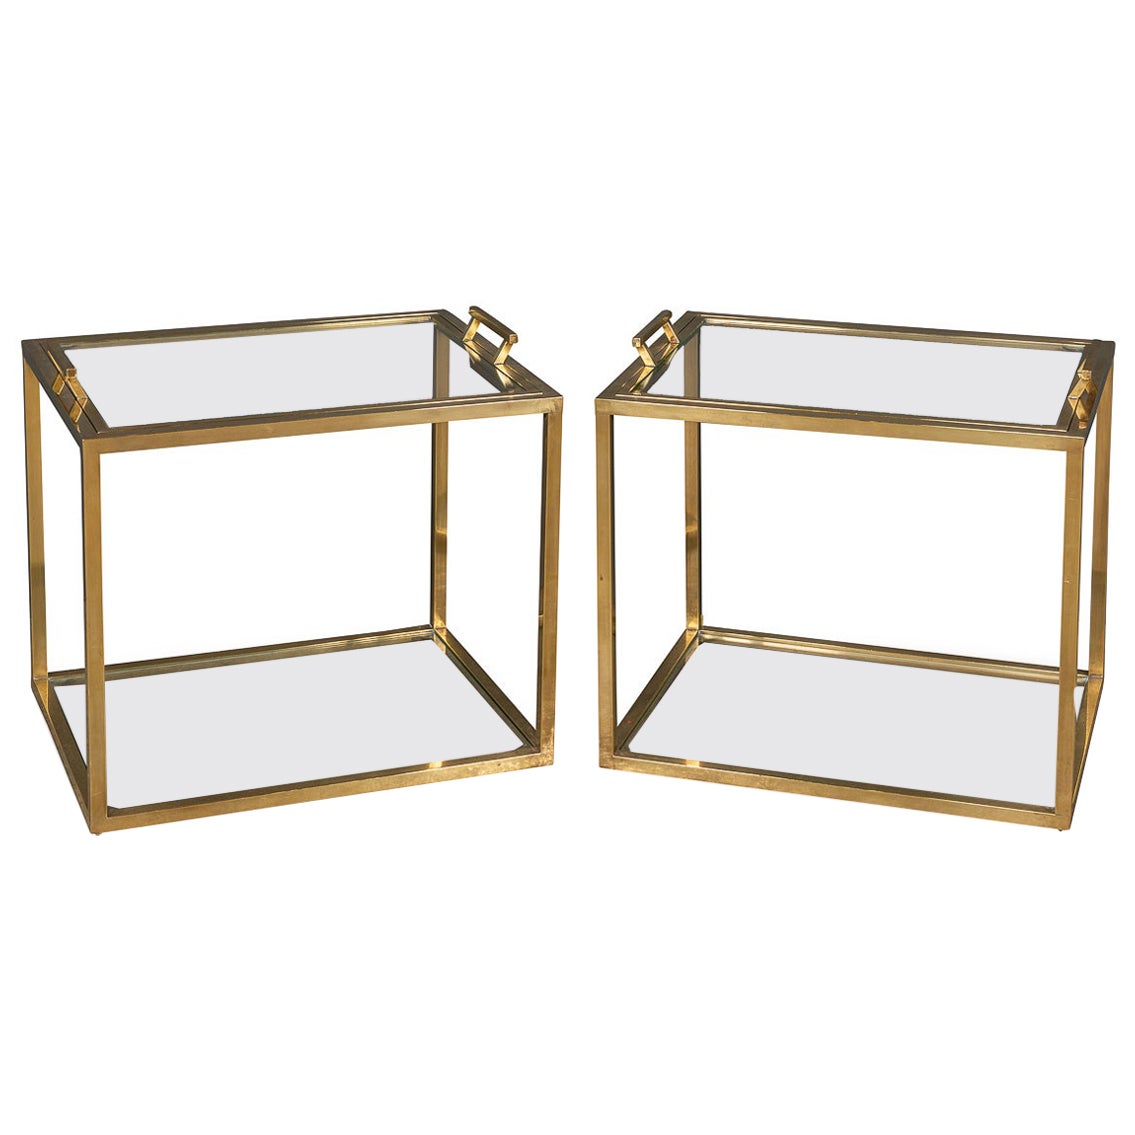 Pair of Italian Brass Side Tables with Removable Trays, circa 1970